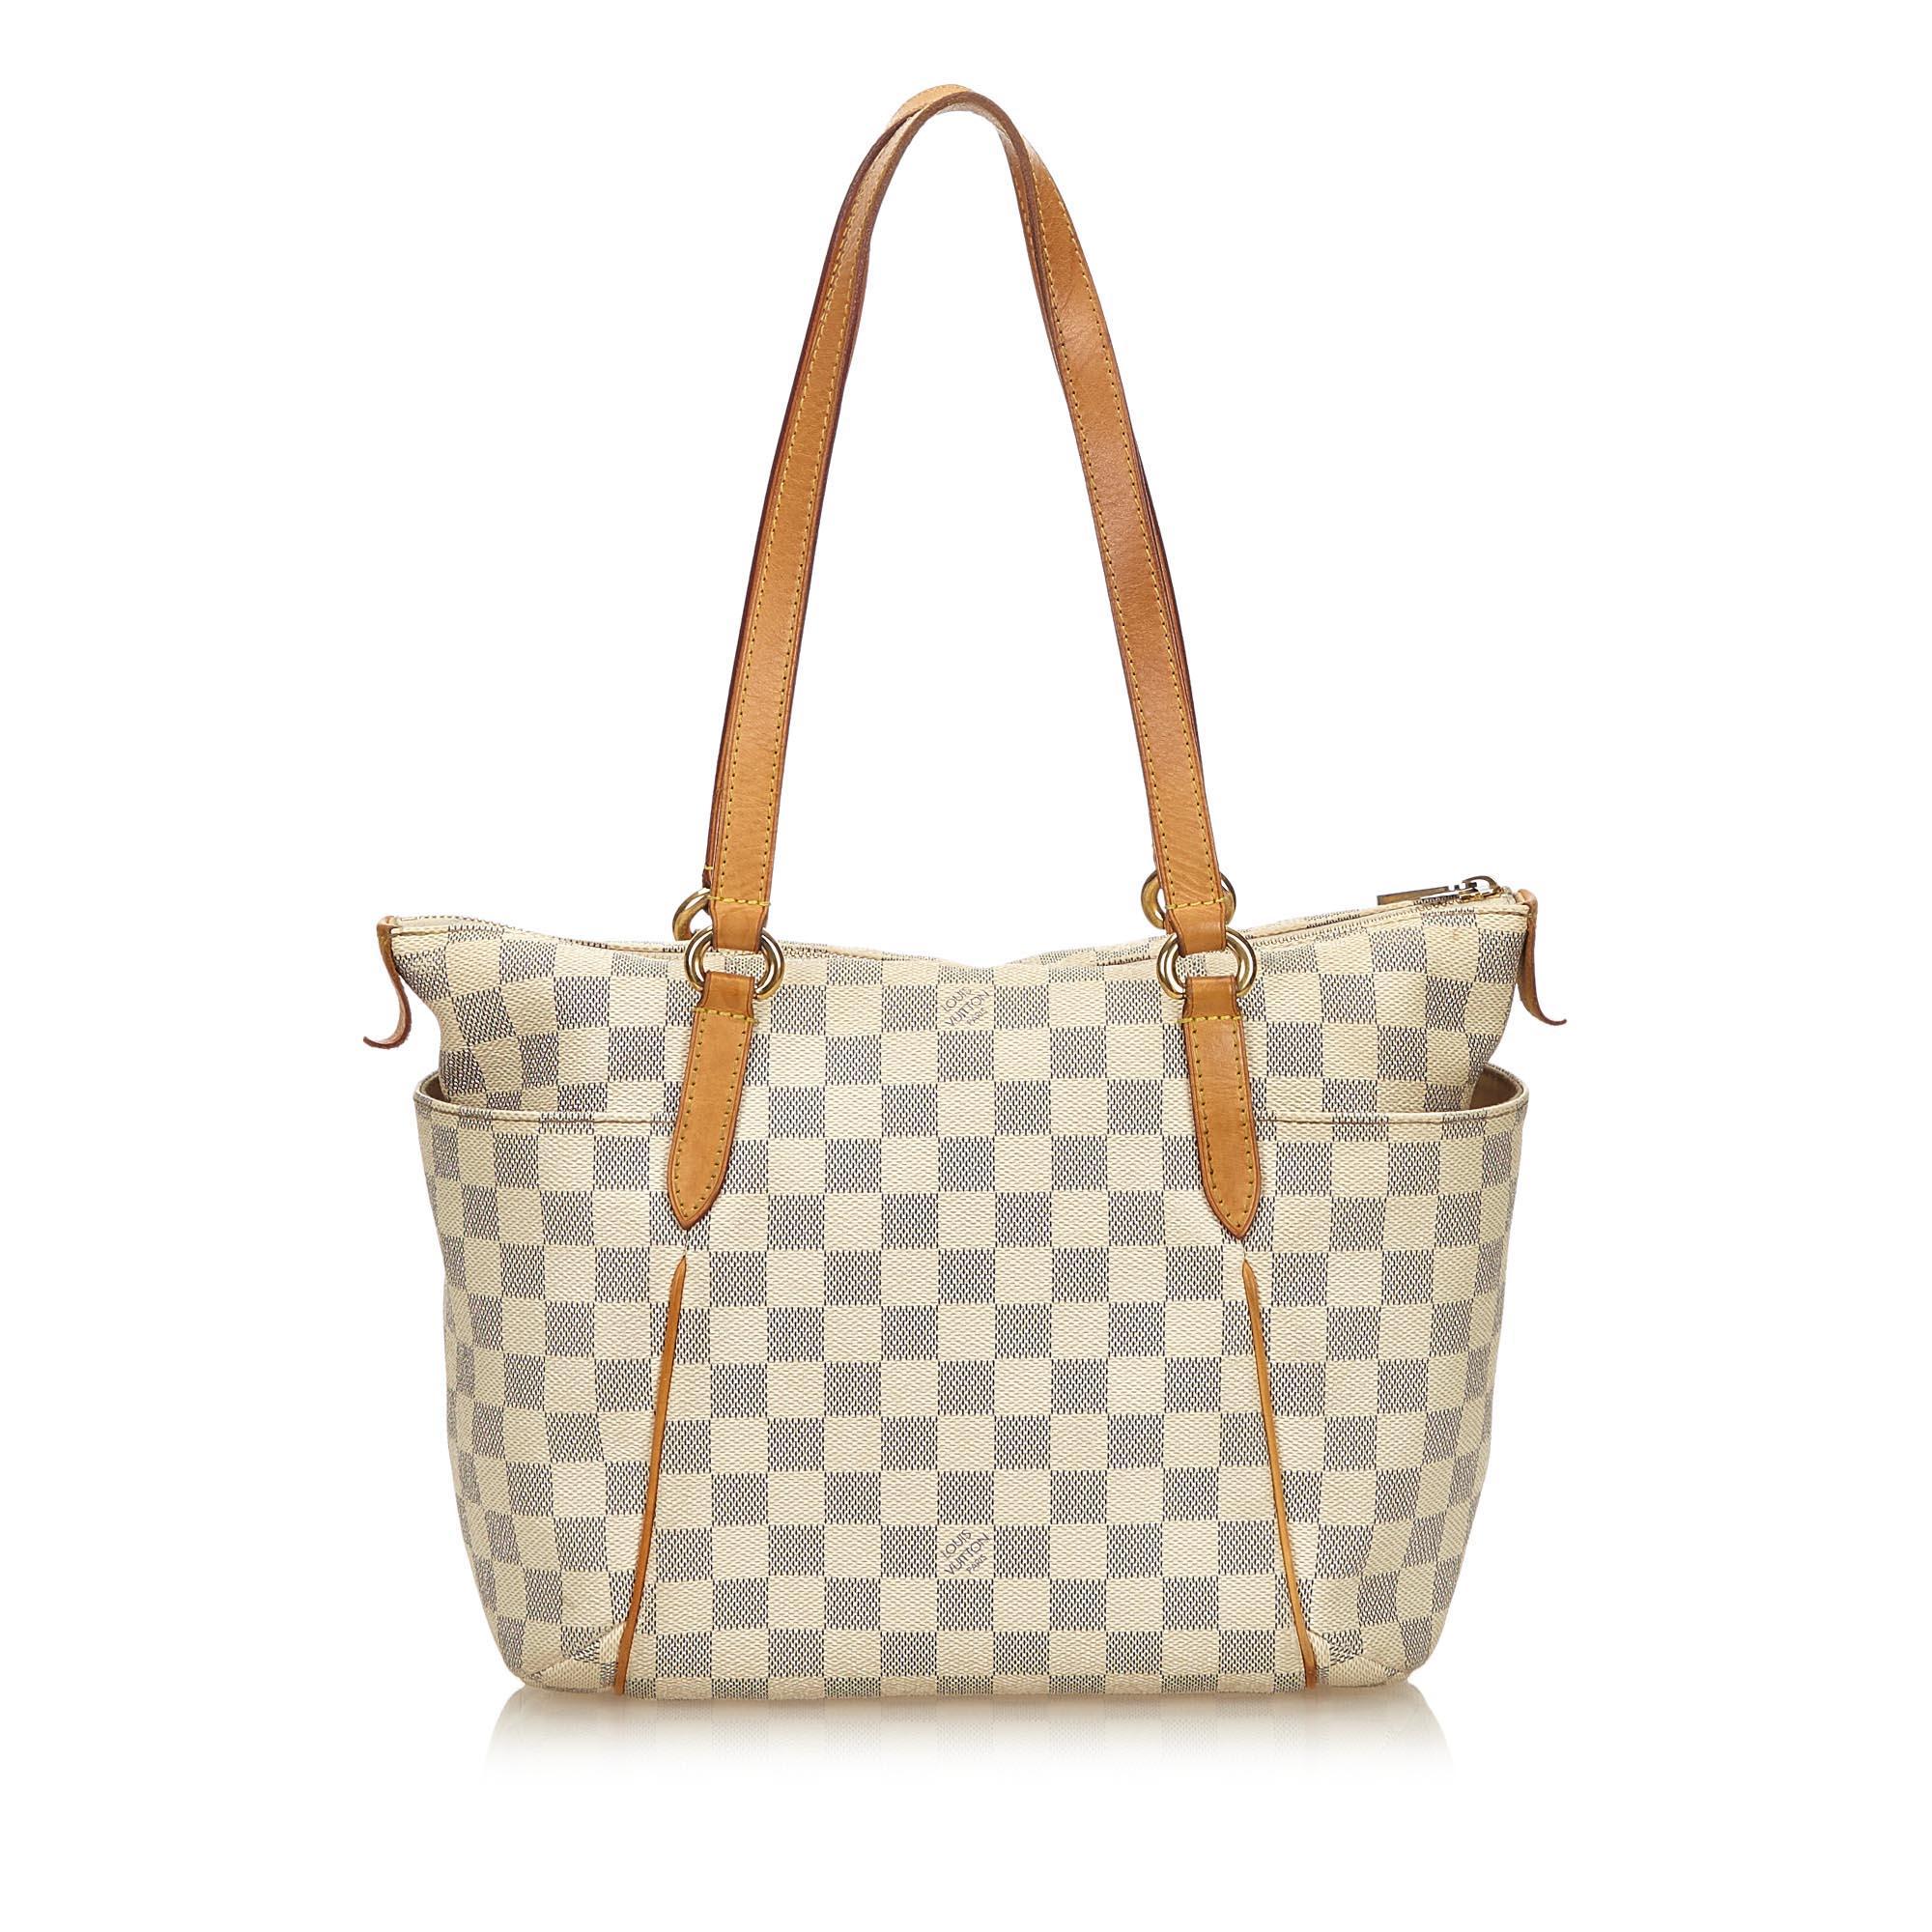 Louis Vuitton White Leather Damier Azur Canvas Totally Pm Bag in White - Lyst